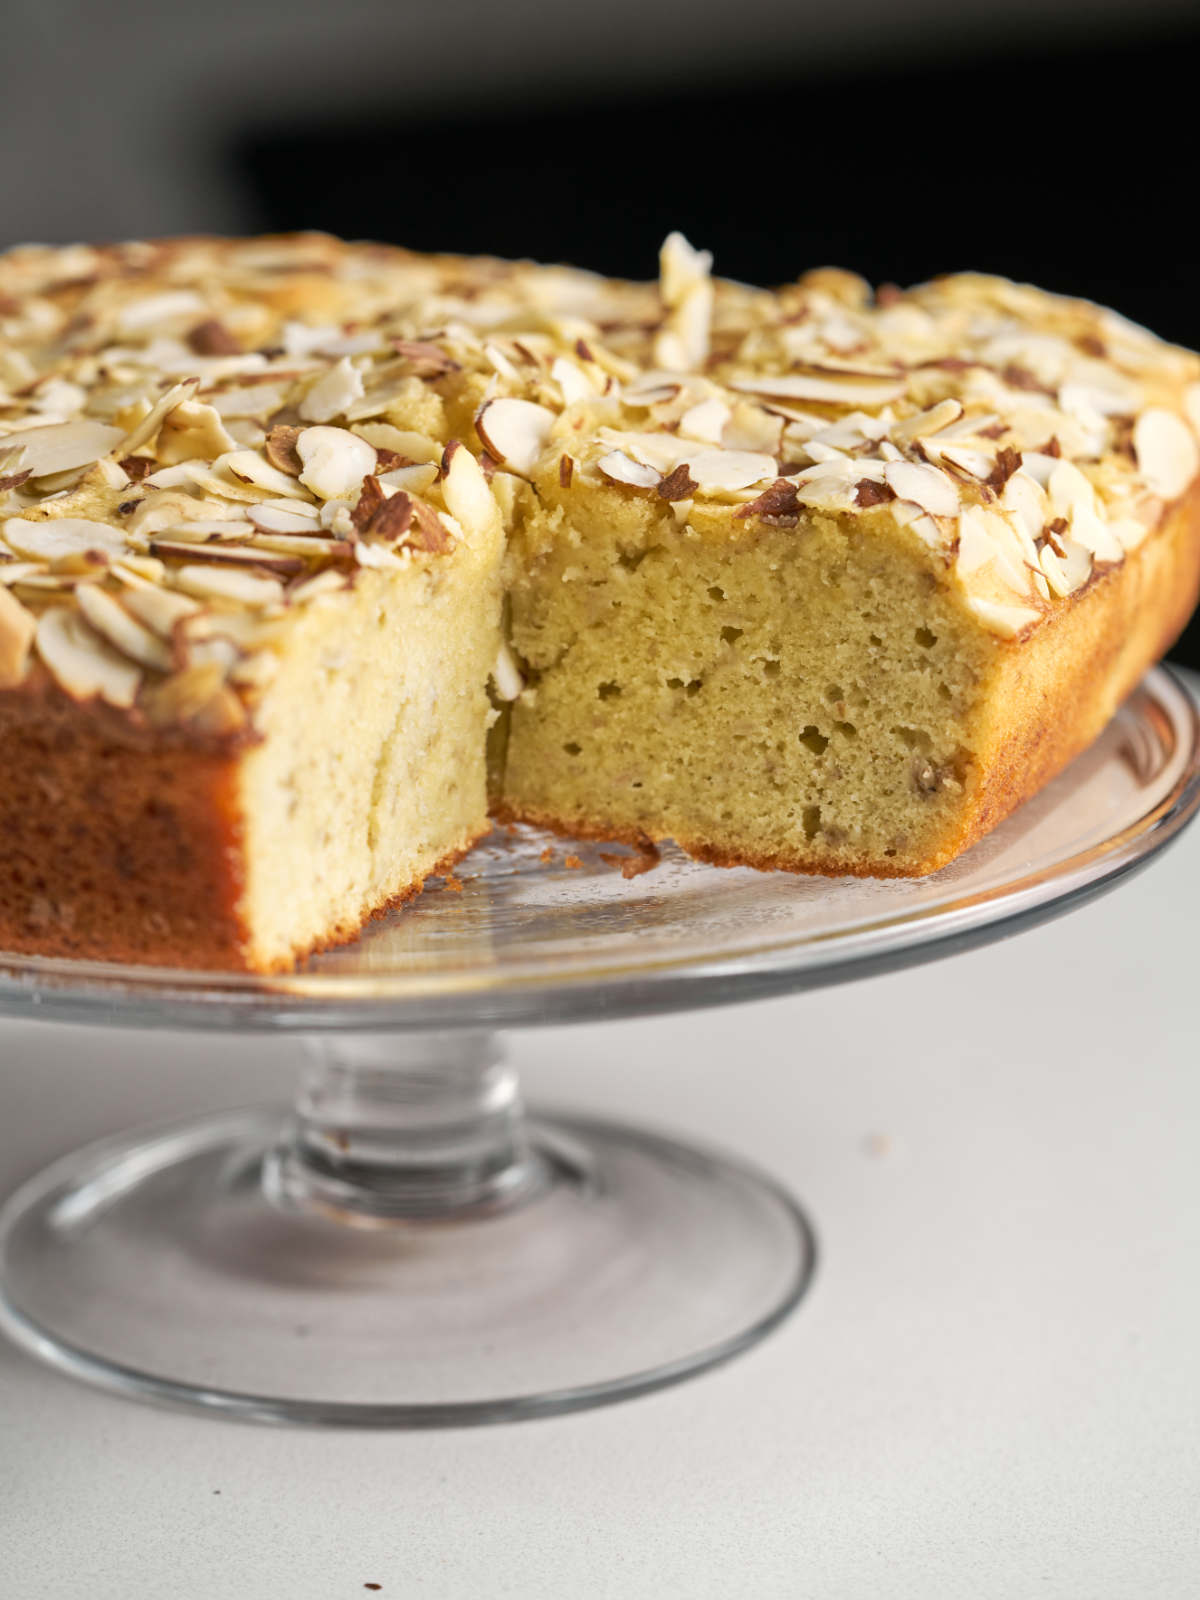 A beige square cake with an almond topping sitting on a glass cake display stand.